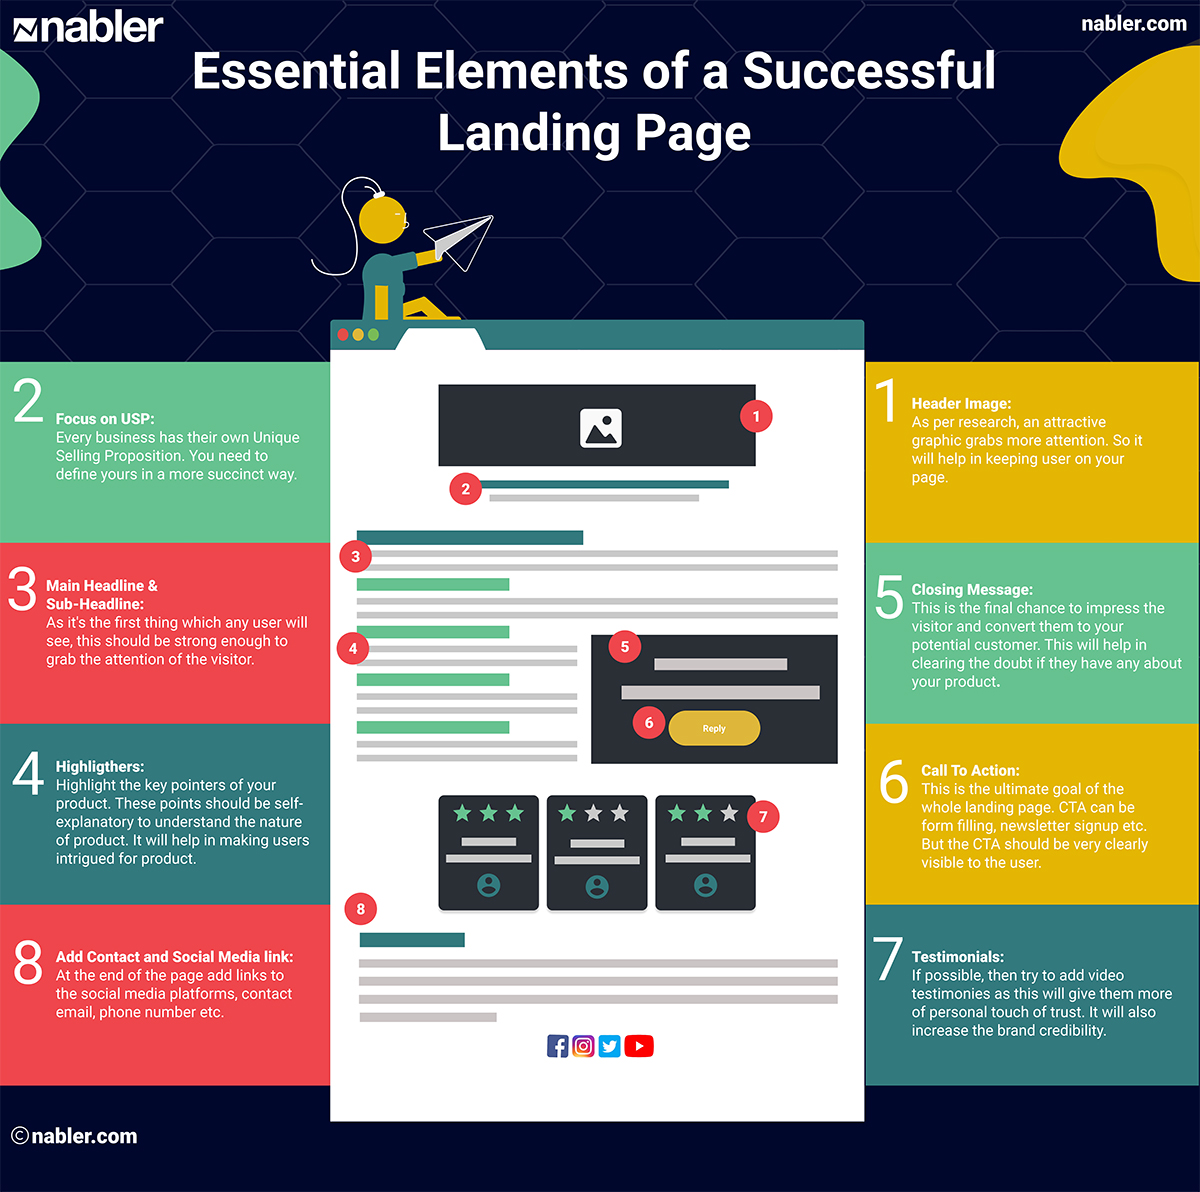 Essential Elements of a Successful Landing Page